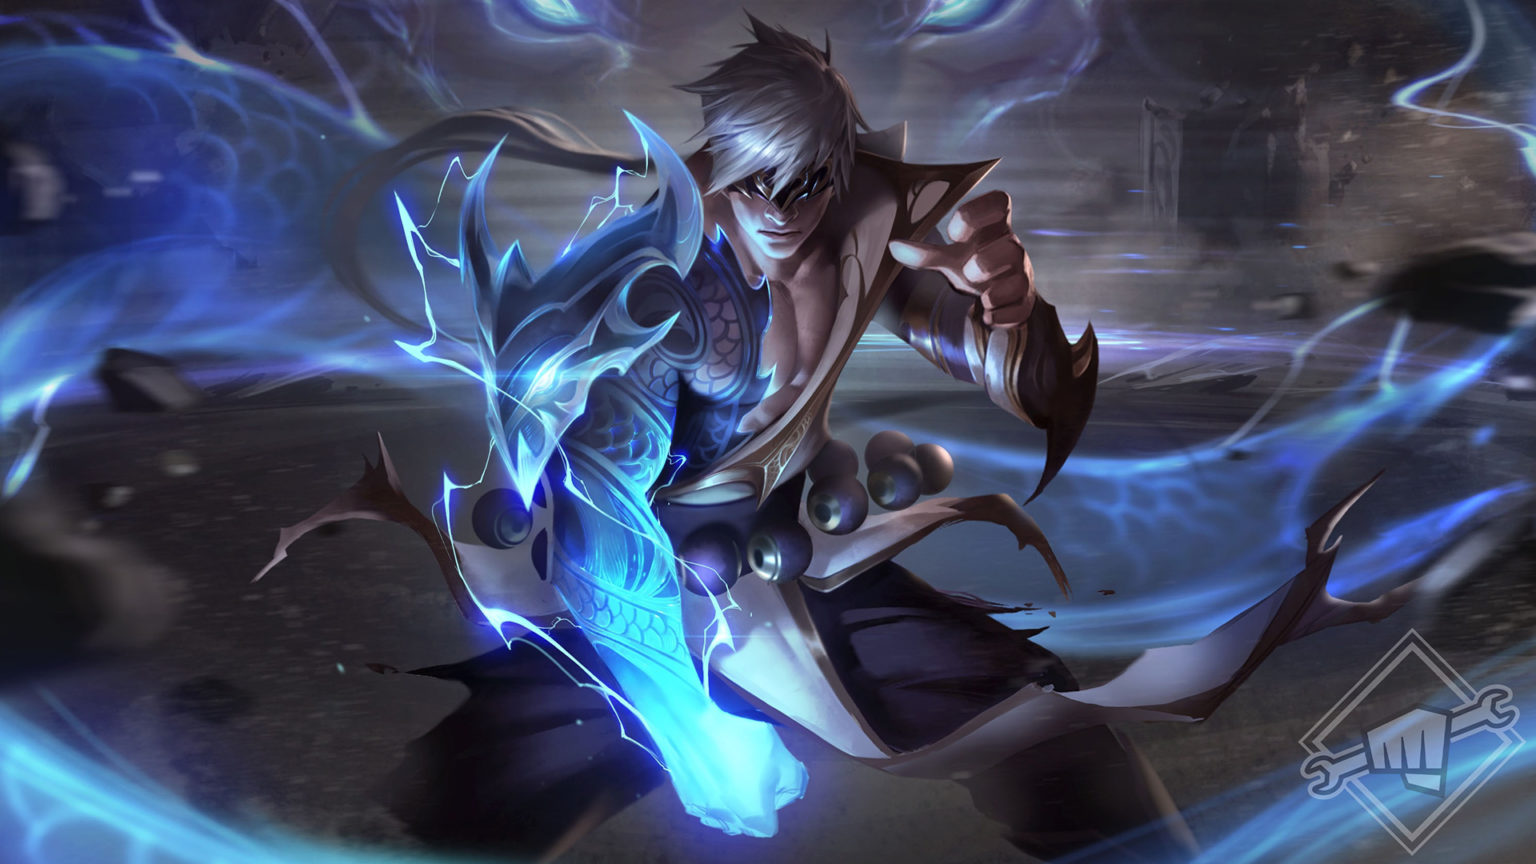 Lee Sin has a pick/ban percentage of 2021 percent at the 98.7 Worlds.